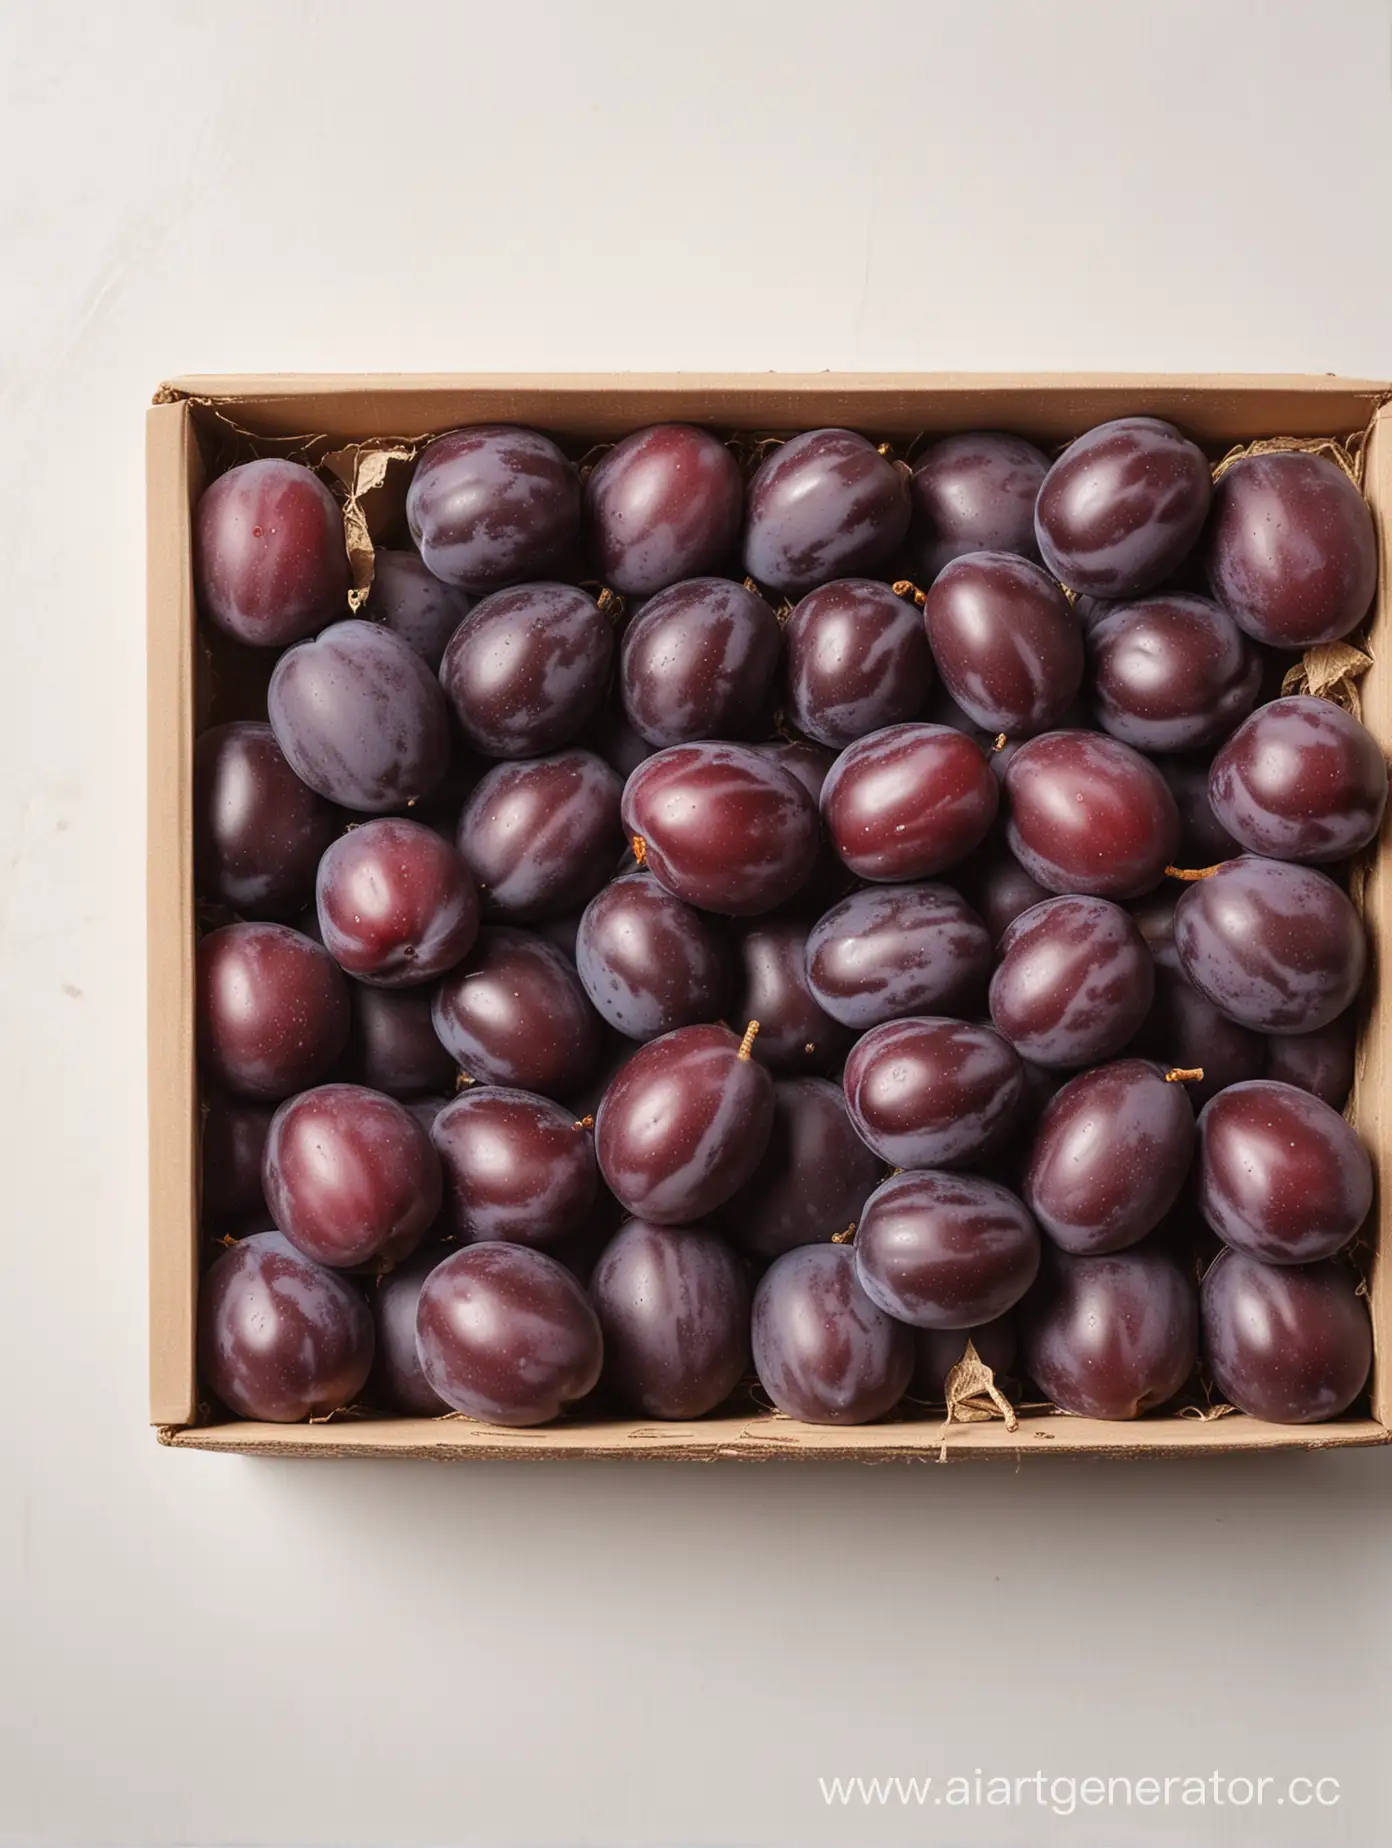 Ripe-Plums-in-a-White-Box-Fresh-Fruit-Still-Life-Photography